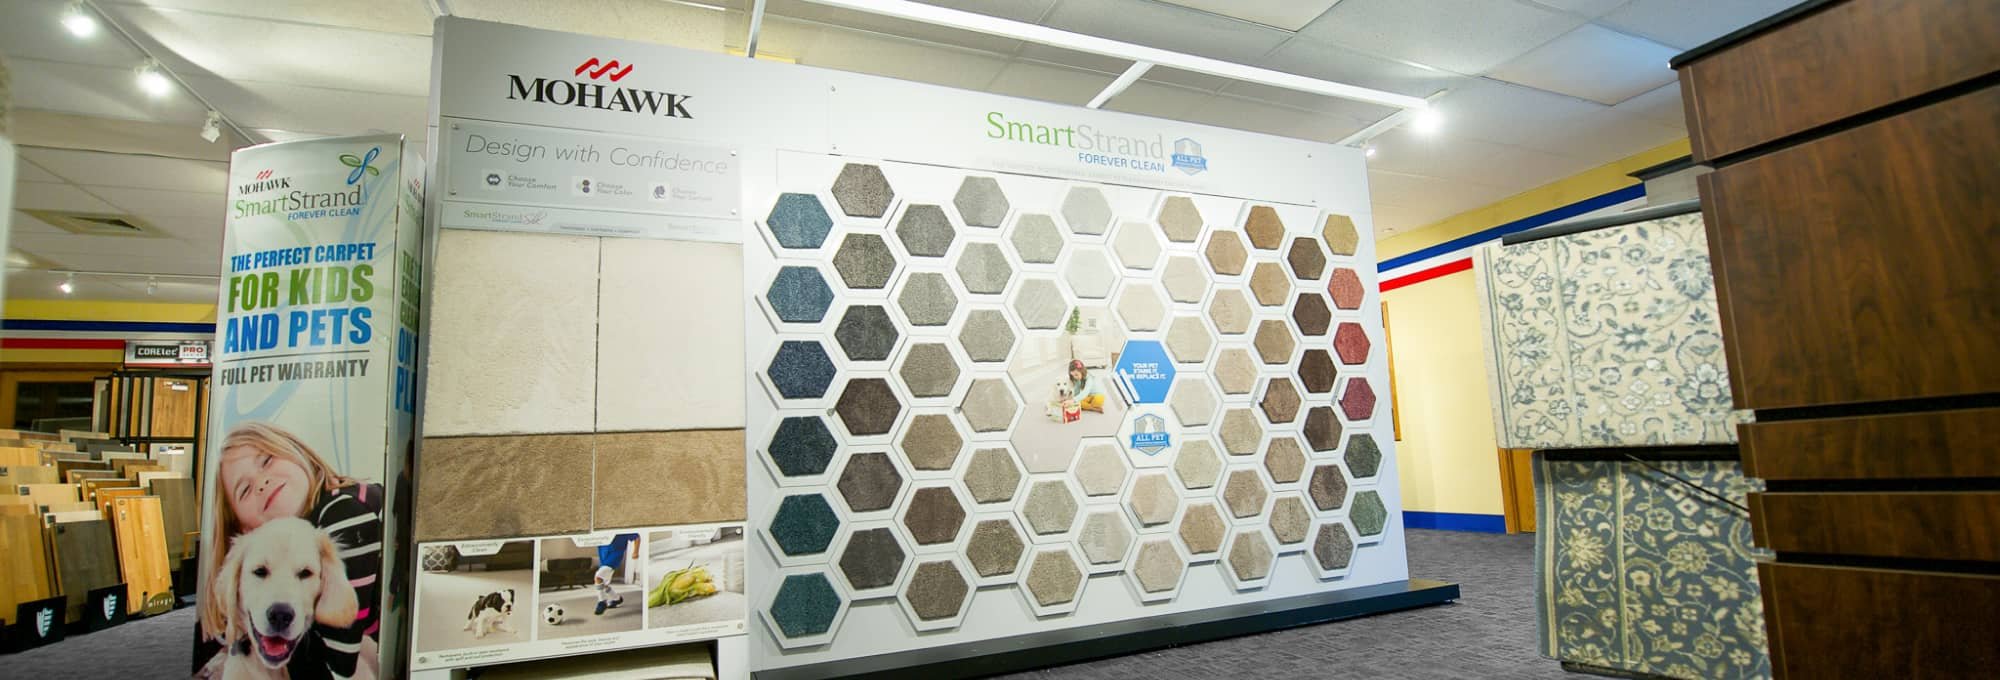 The Gallery at Smart Carpet is a flooring store serving the Manasquan, NJ area with a wide variety of flooring brands